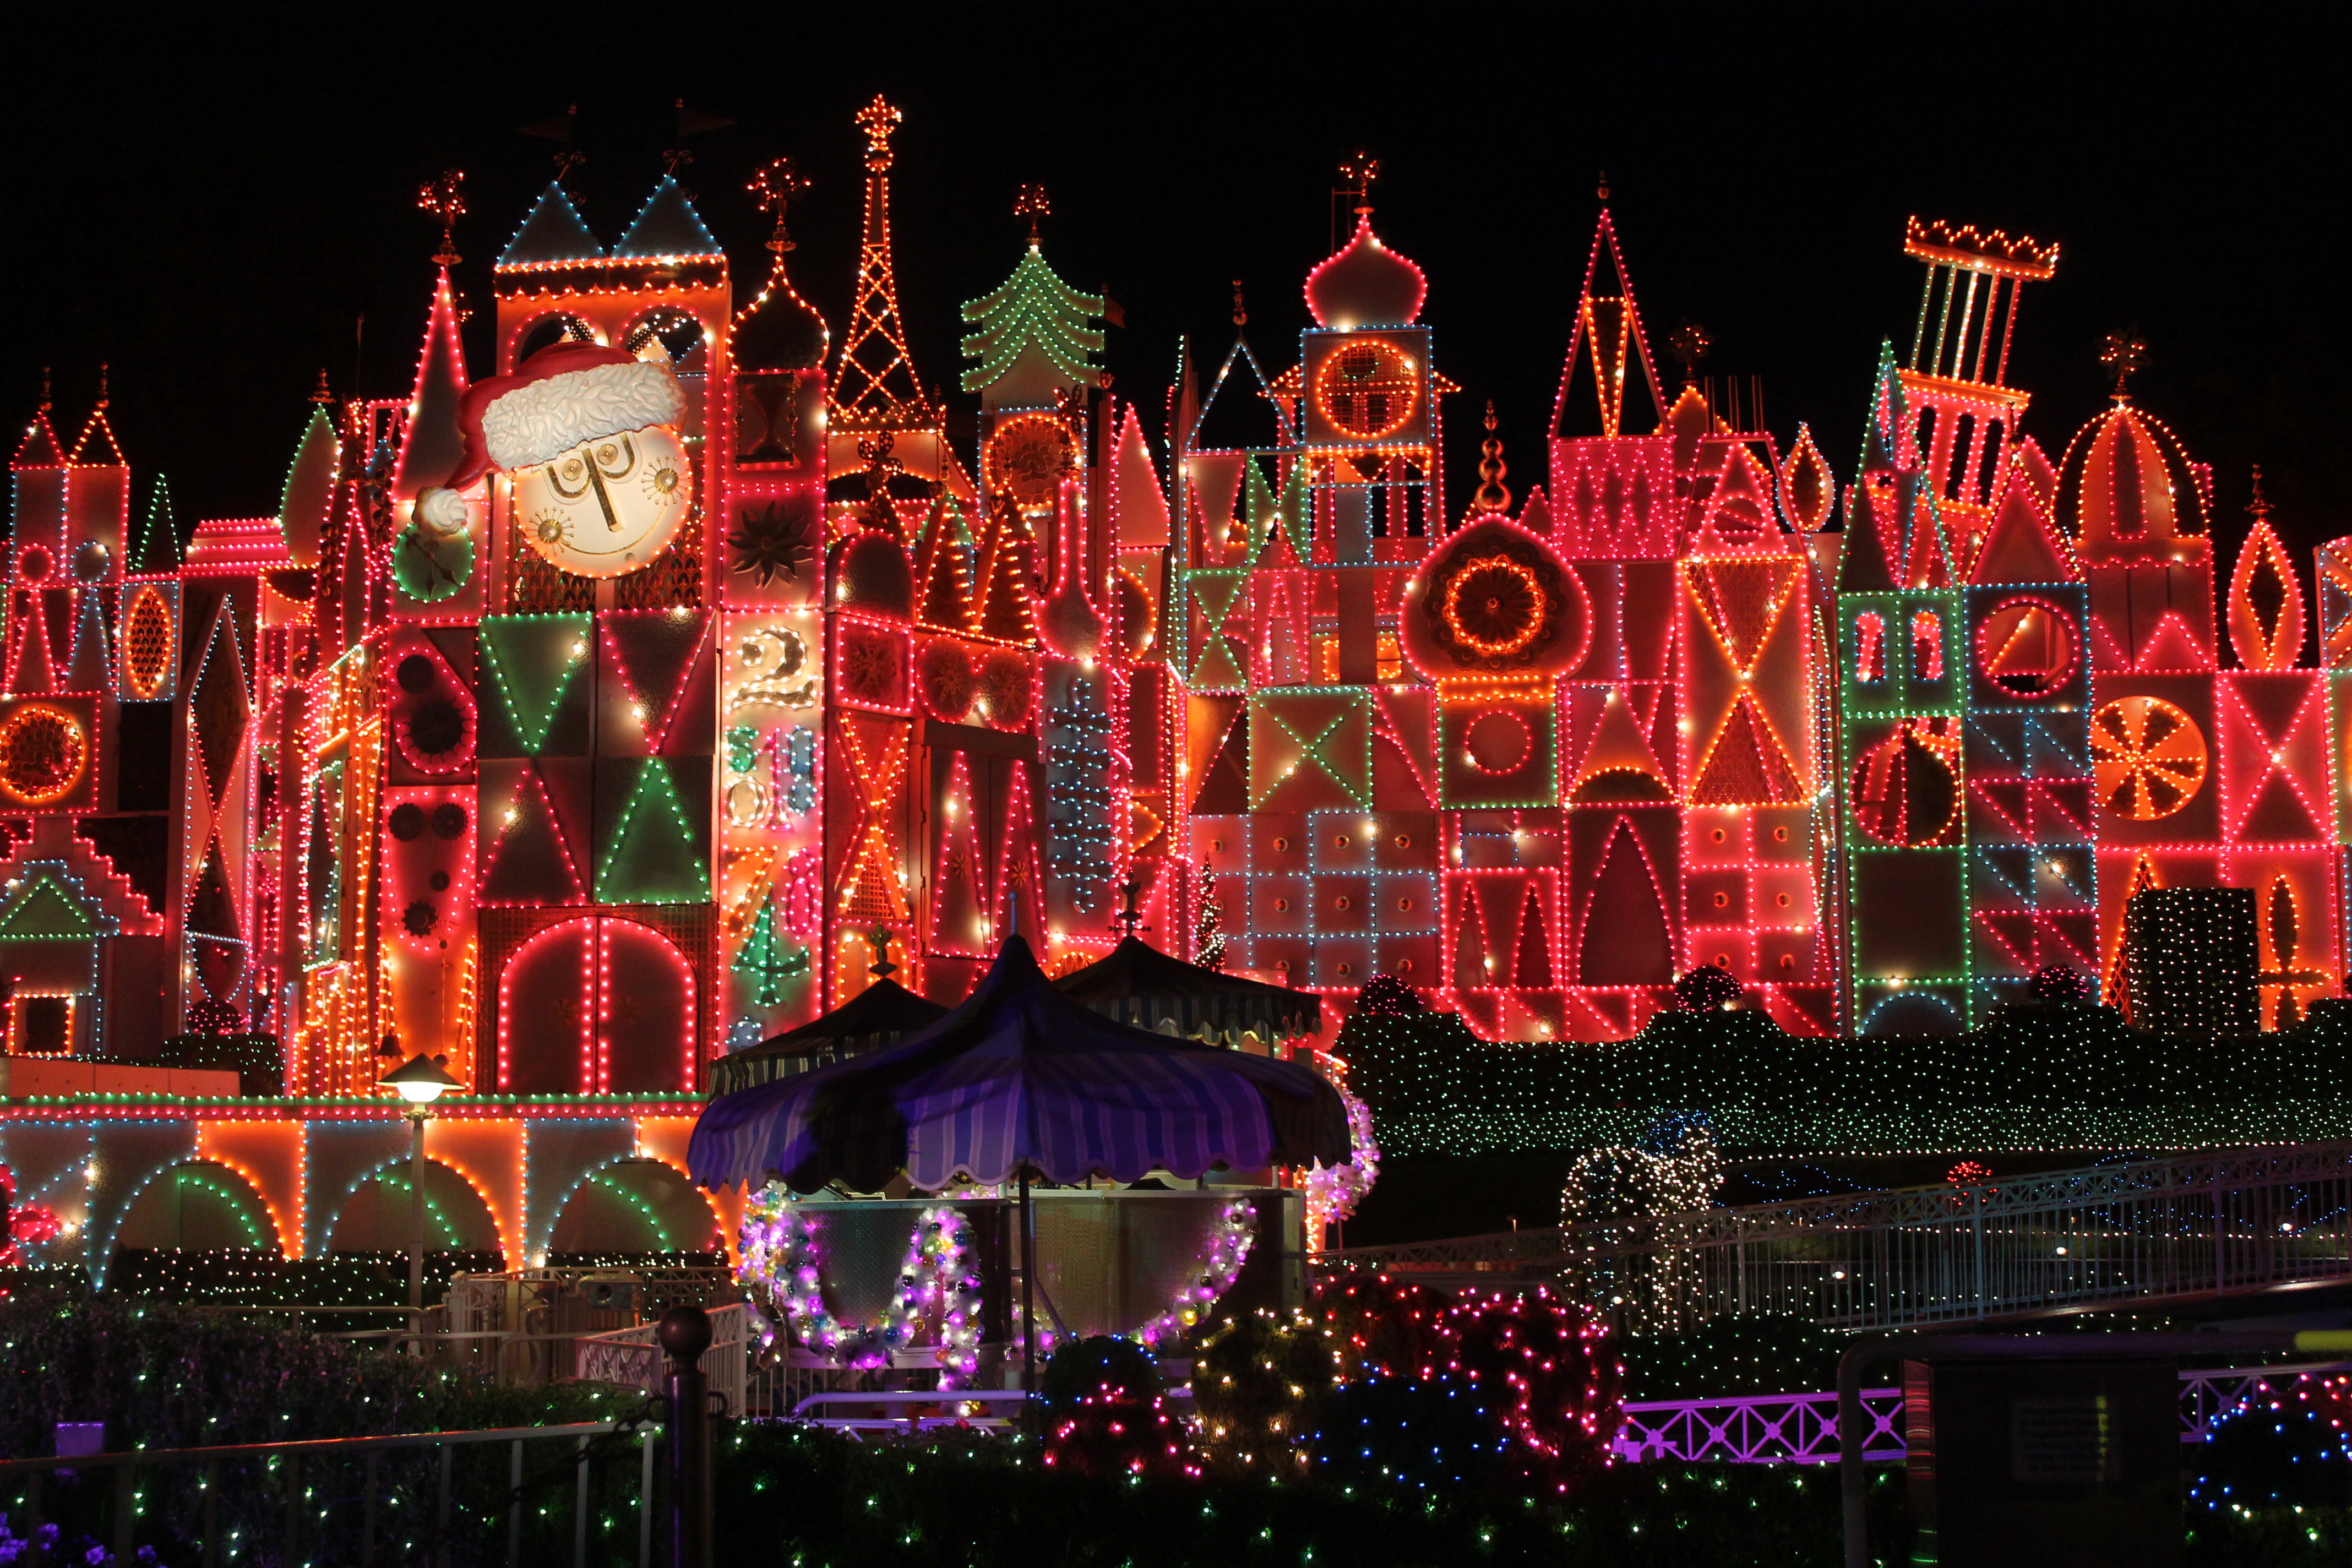 It’s a world of laughter, a world of tears. A world of hope and a world of fears. It’s a world of 20 years of it’s a small world holiday ride at Disneyland!